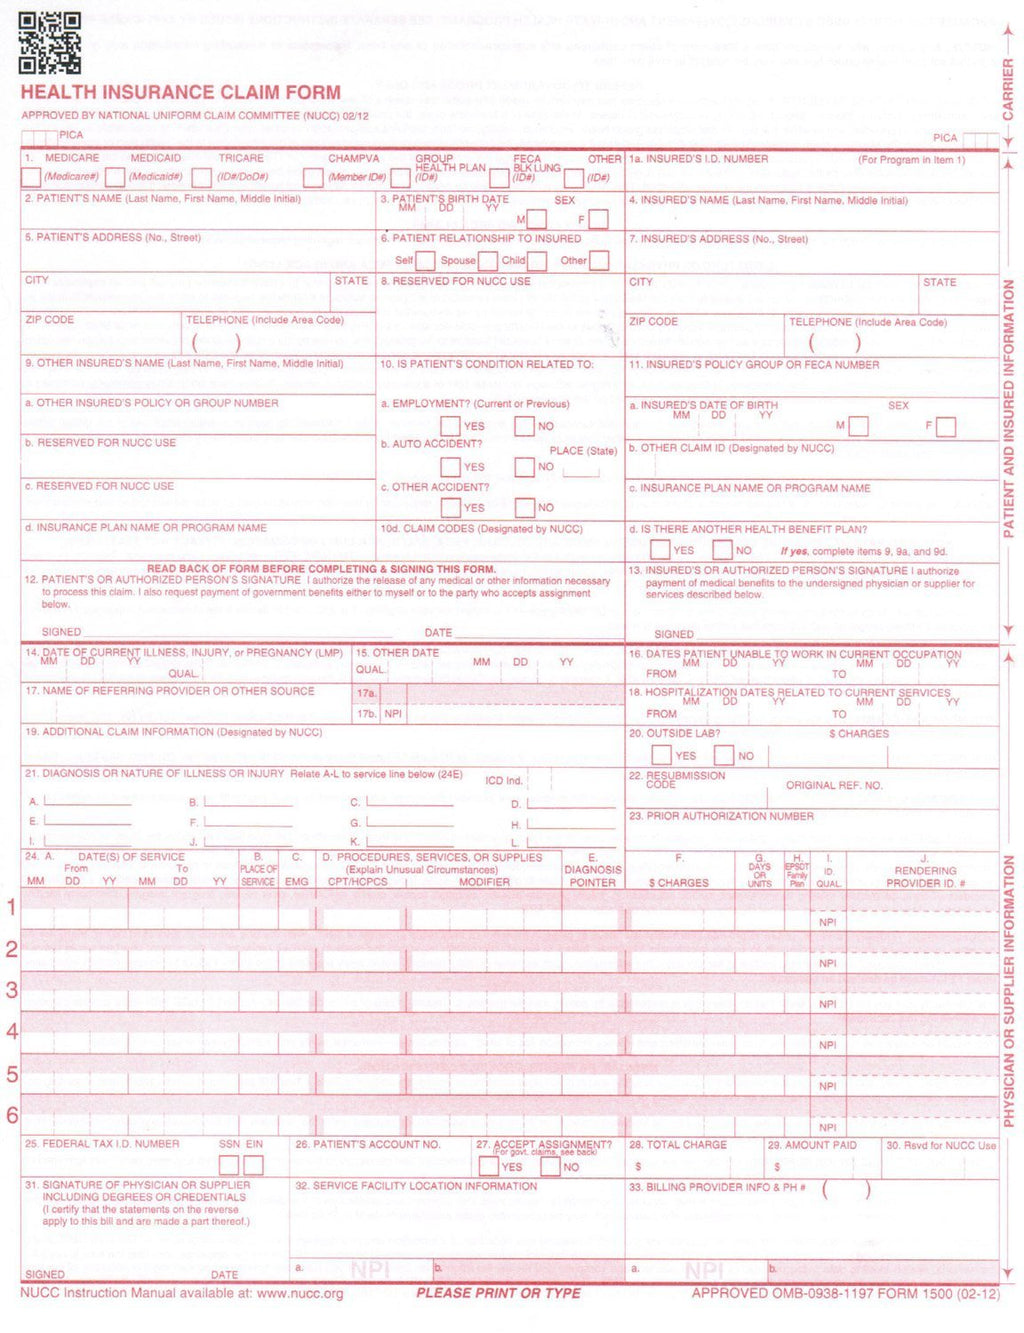 New CMS 1500 Health Insurance Claim Forms, HCFA Approved Version (02/12) - Ream of 100 Forms